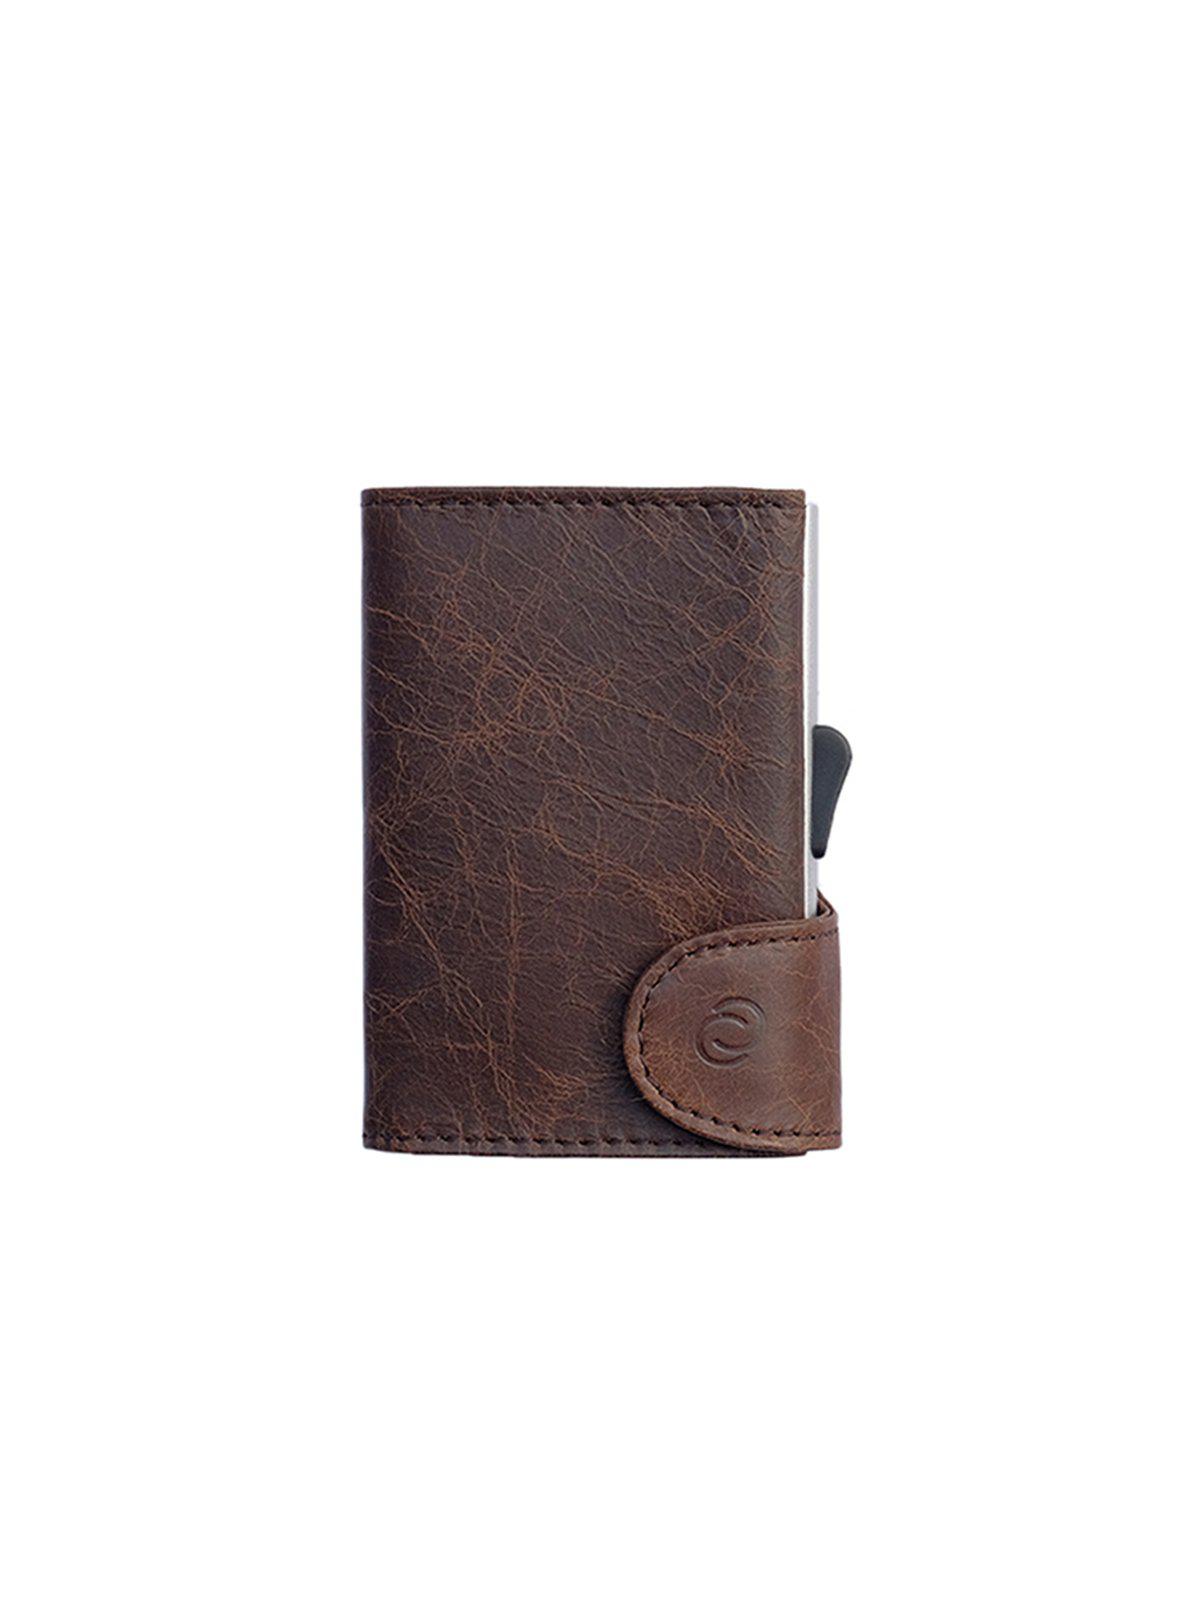 C-Secure Italian Leather RFID Wallet Dark Brown - MORE by Morello Indonesia